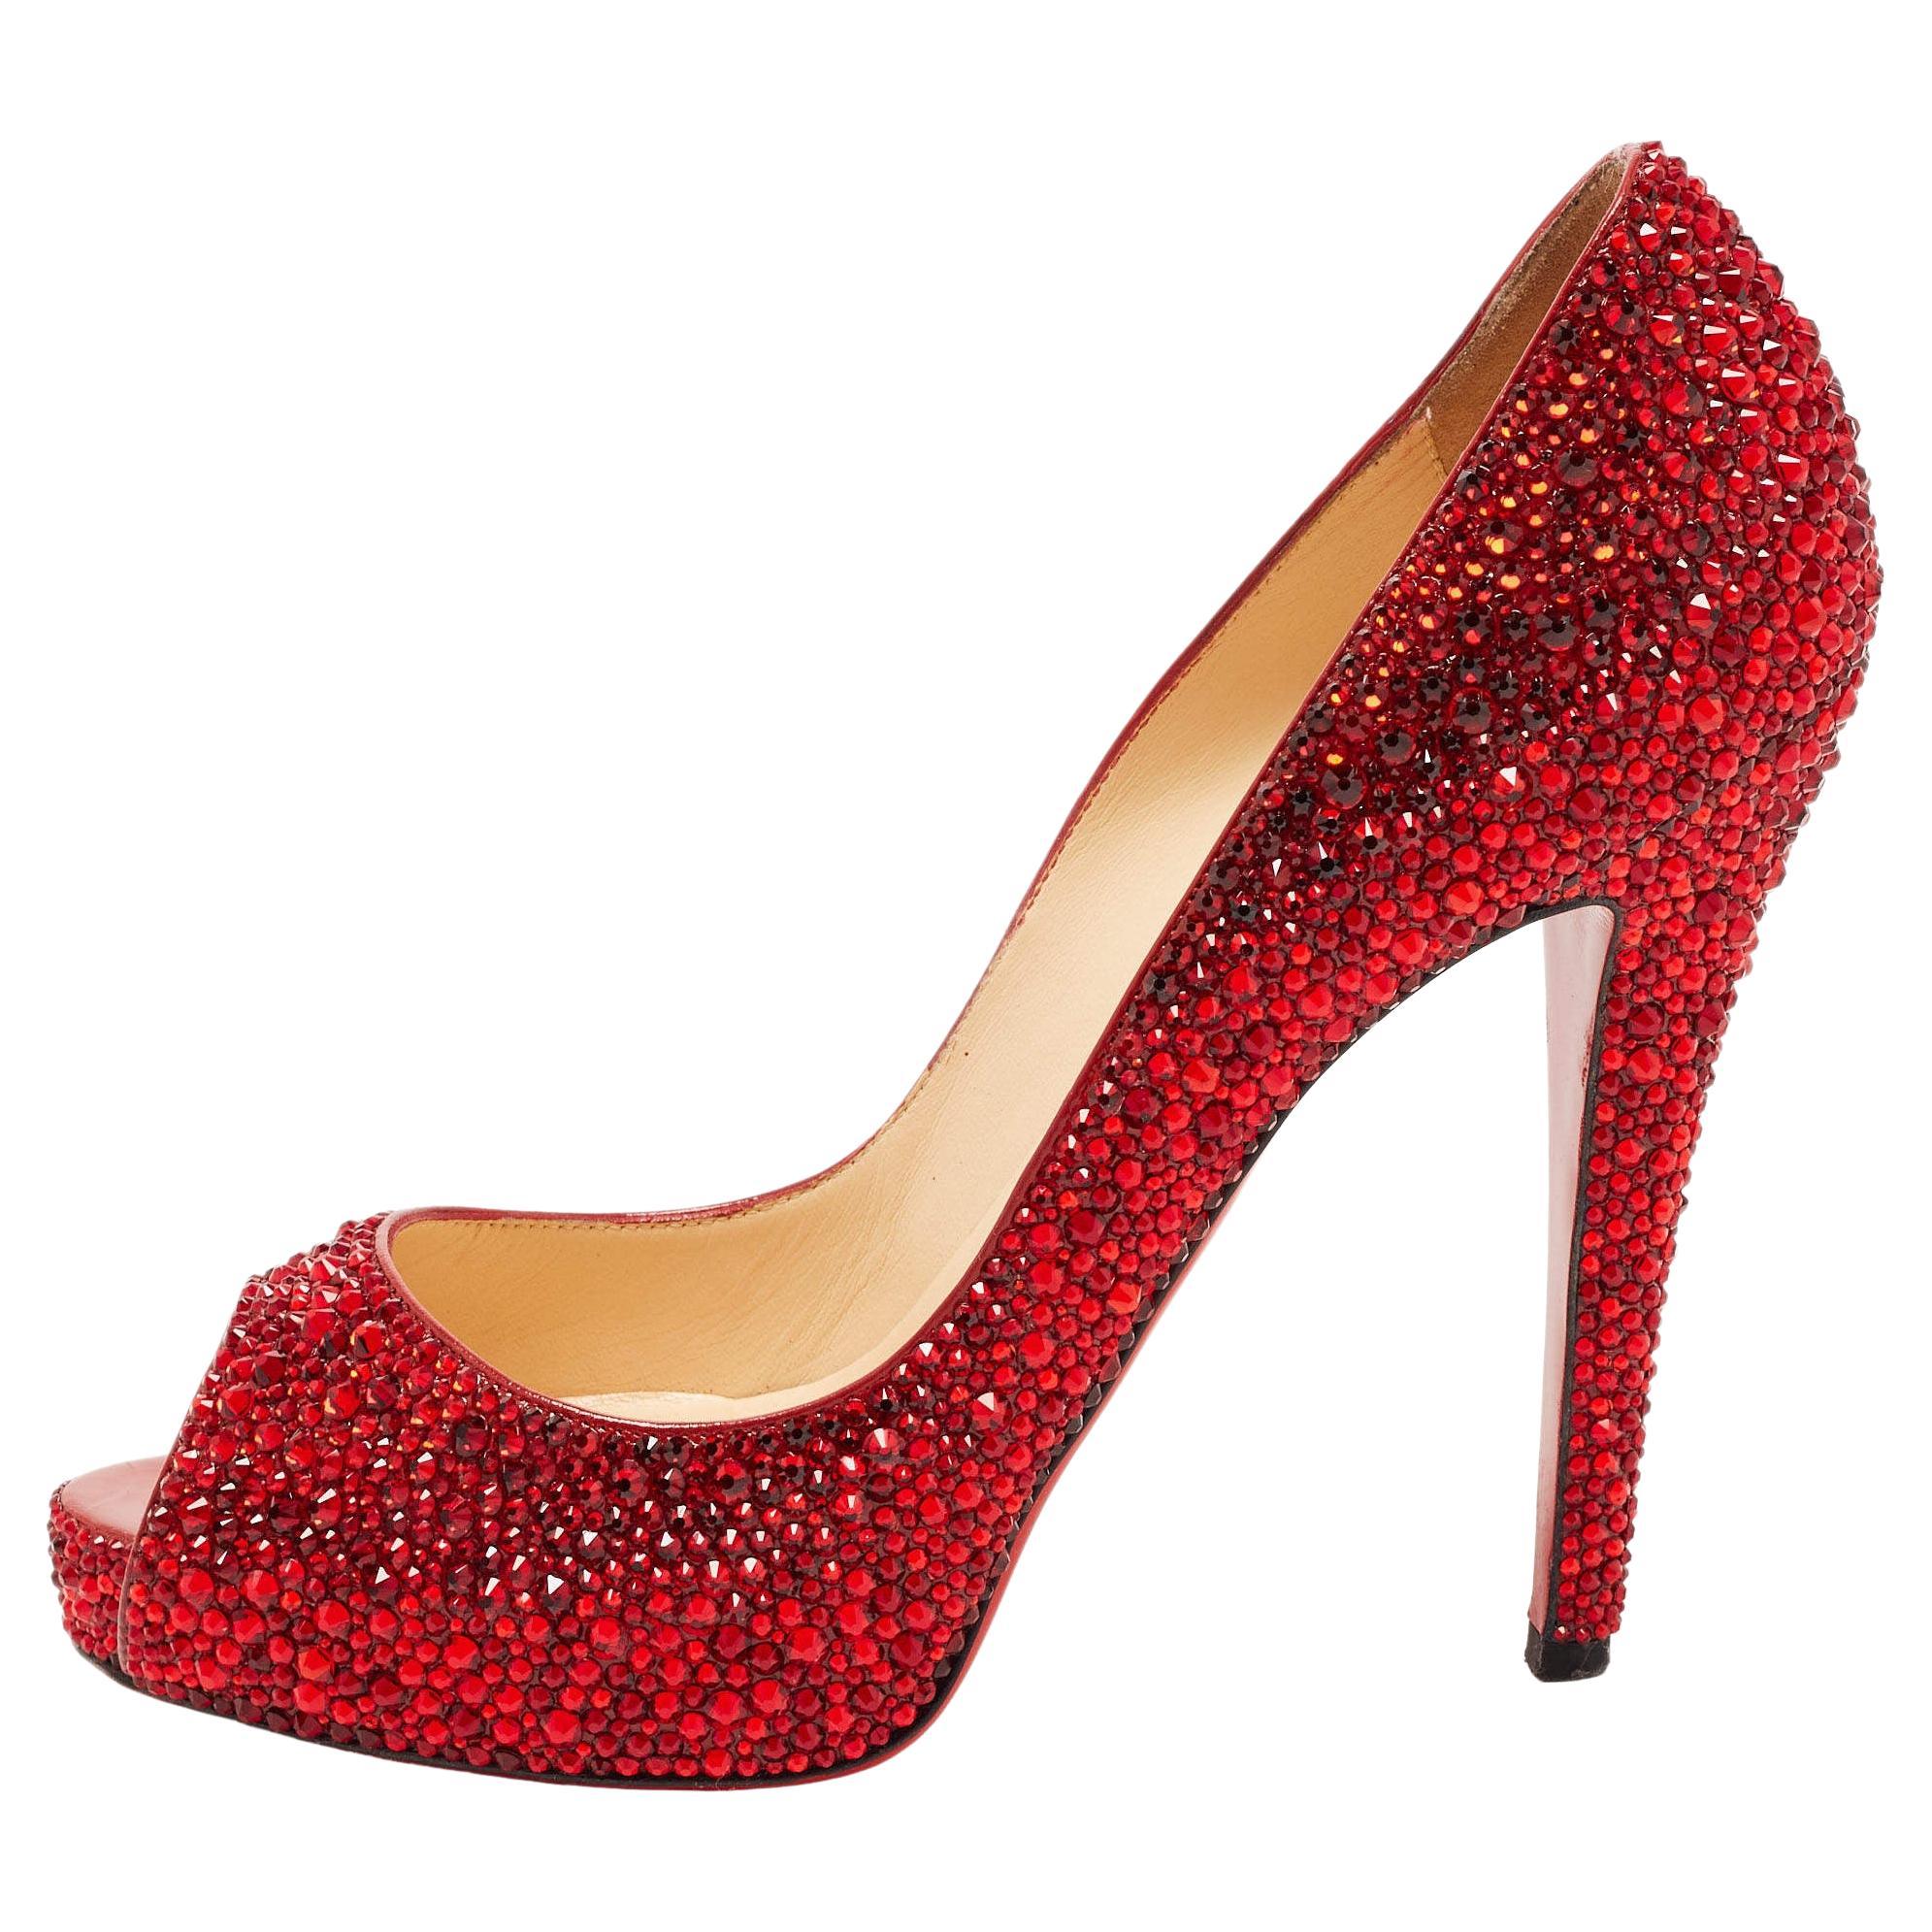 Christian Louboutin Red Leather Strass Very Prive Pumps Size 37.5 For Sale